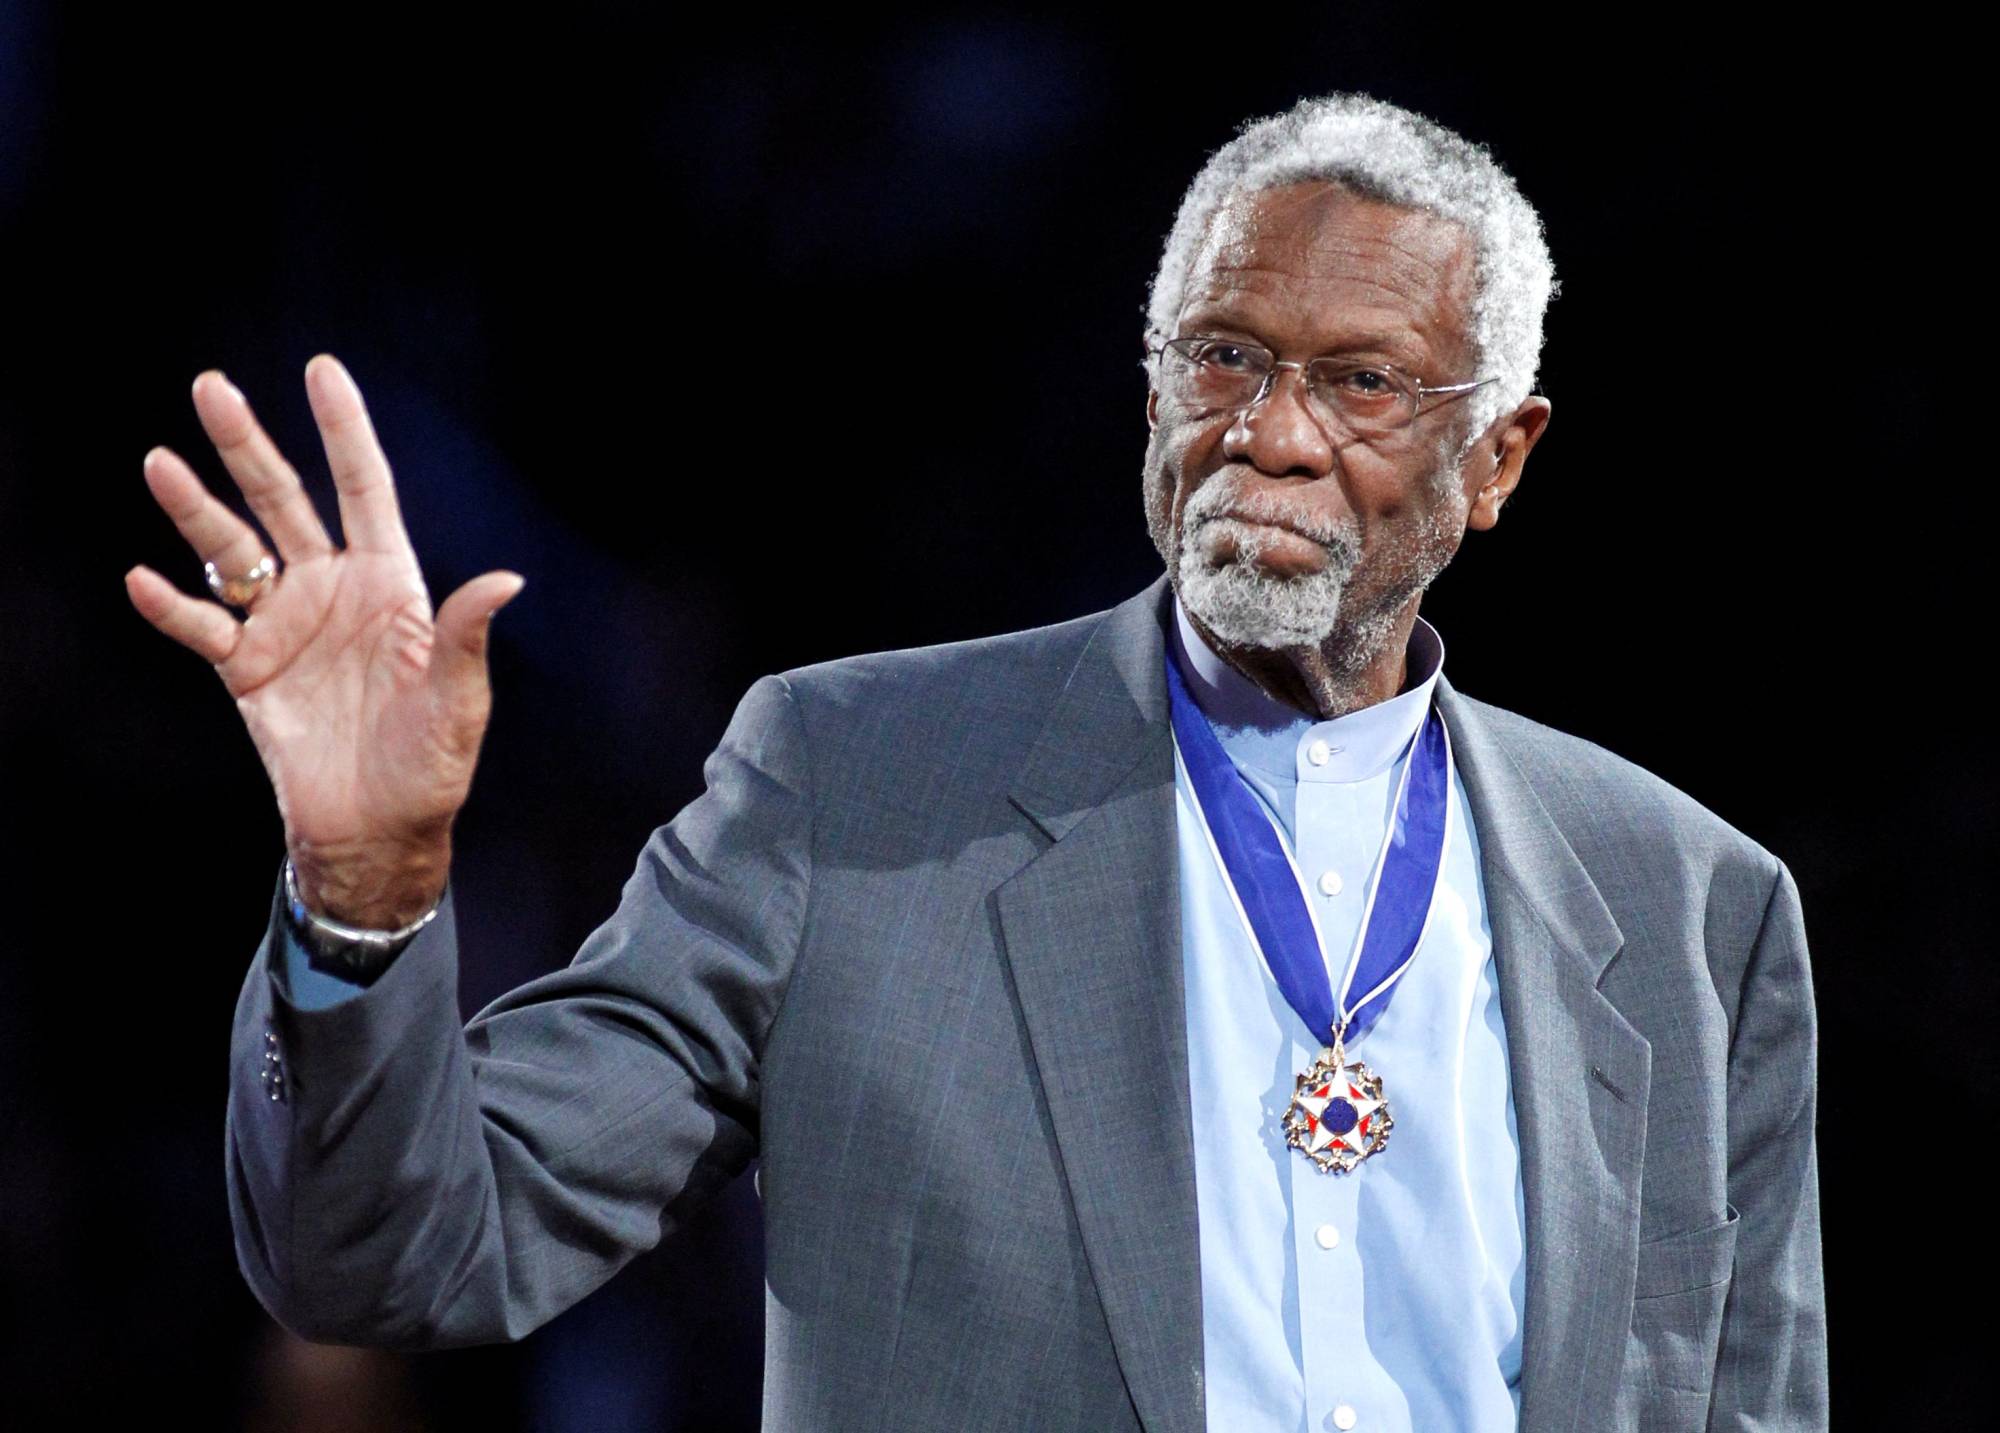 Celtics Legend Bill Russell's No. 6 Jersey to Be Permanently